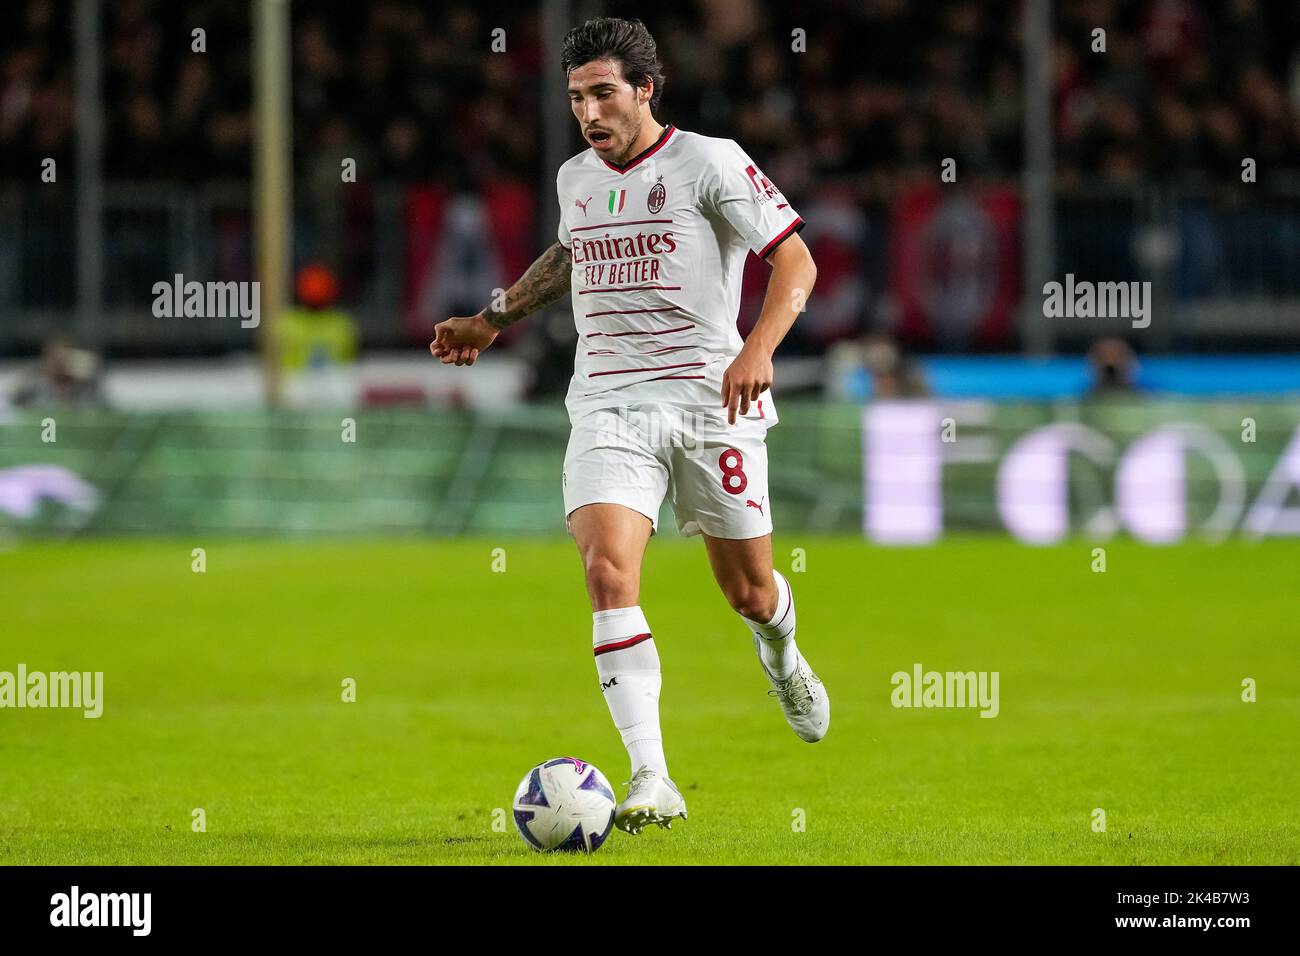 Empoli, Italy. 01st Oct, 2022. Sandro Tonali of AC Milan in action during the Serie A football match between Empoli FC and AC Milan at Carlo Castellani stadium in Empoli (Italy), October 1st, 2022. Photo Paolo Nucci/Insidefoto Credit: Insidefoto di andrea staccioli/Alamy Live News Stock Photo